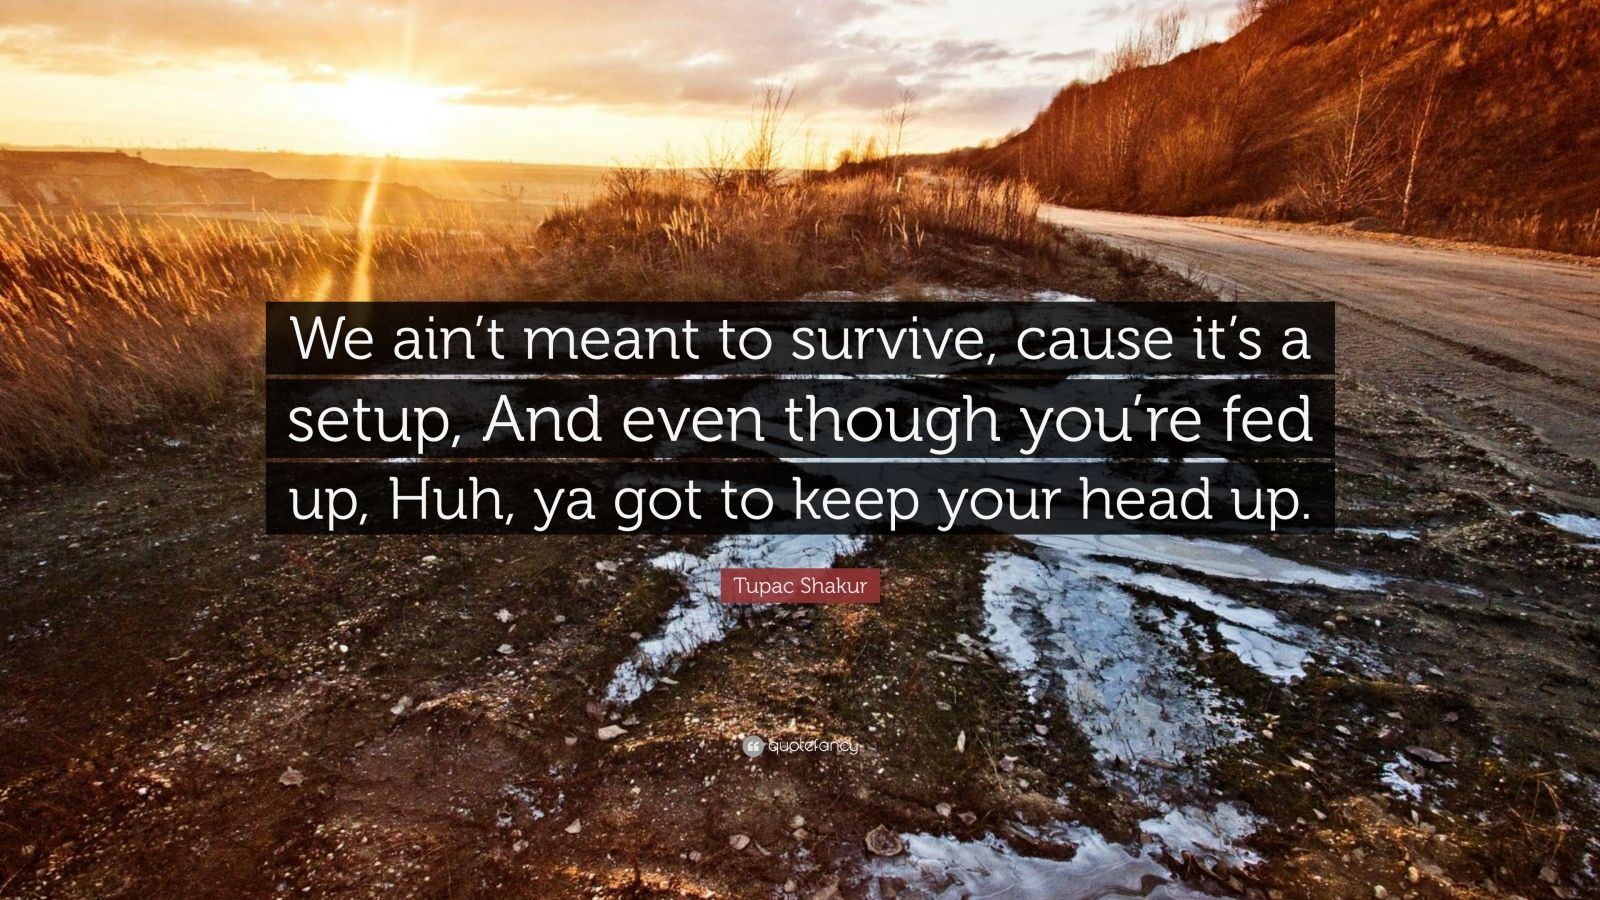 Tupac Shakur Quote “We ain t meant to survive cause it s a